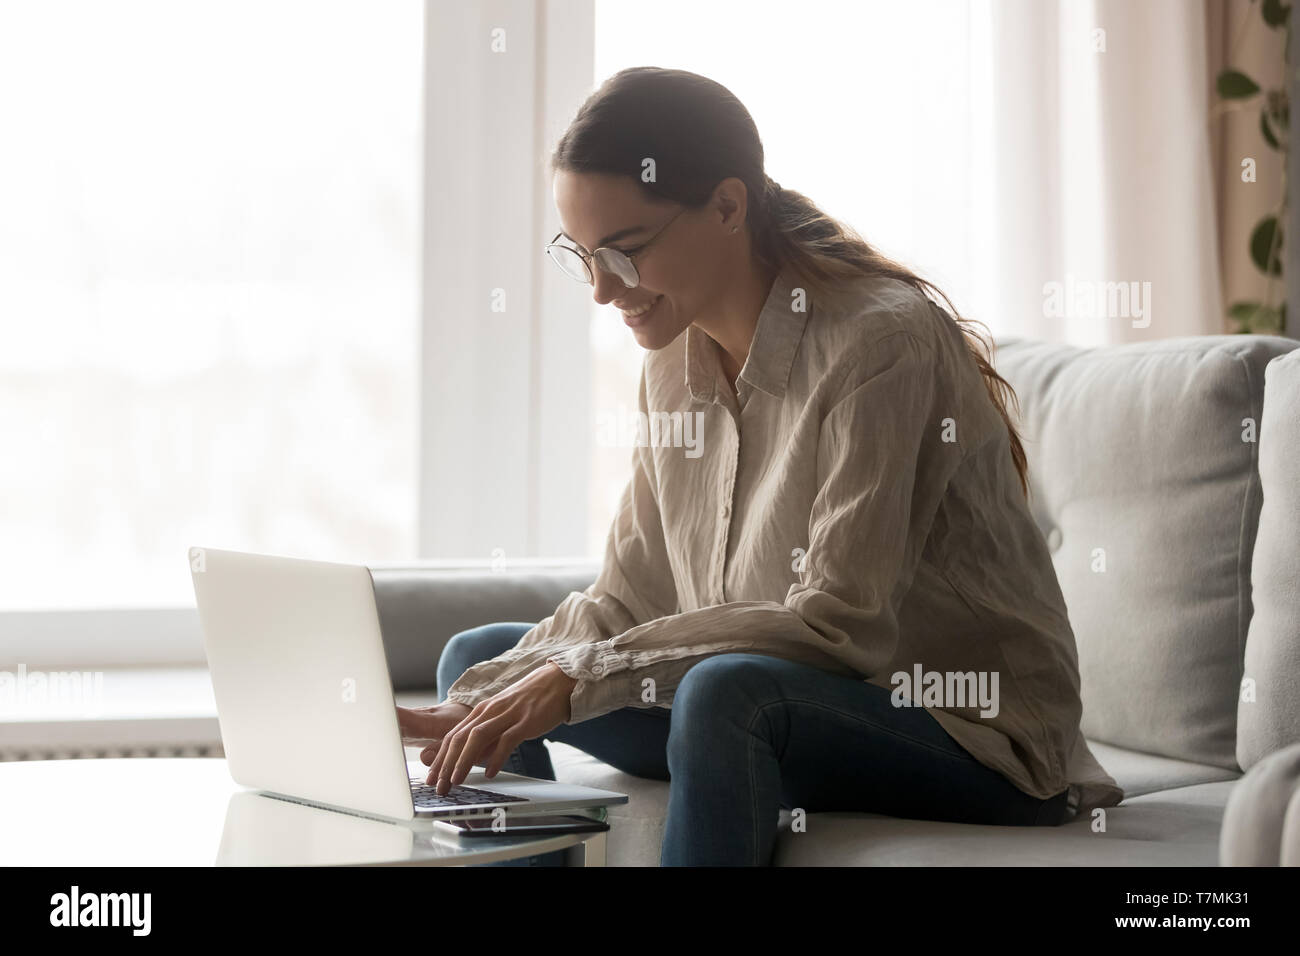 Woman in glasses sitting on couch smiling typing on computer Stock Photo